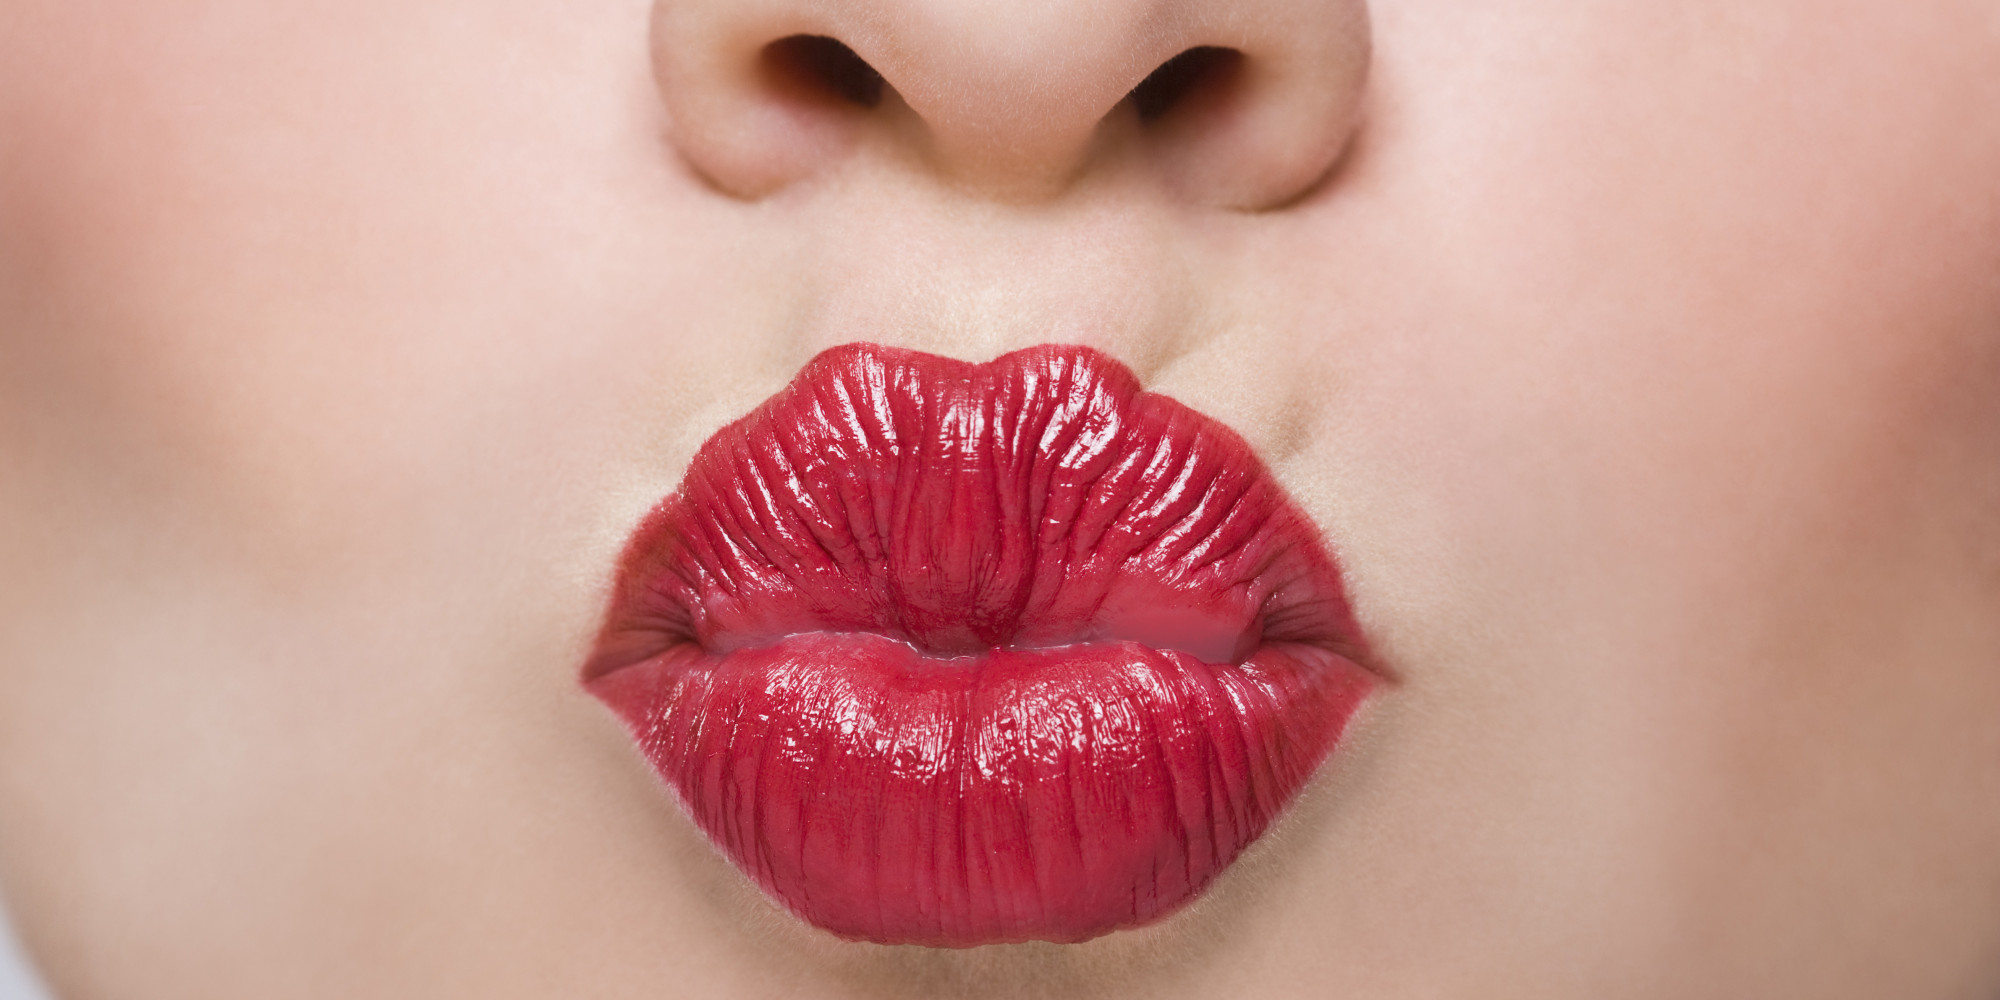 9 Facts About Kissing That Will Make You Want To Pucker Up Even More